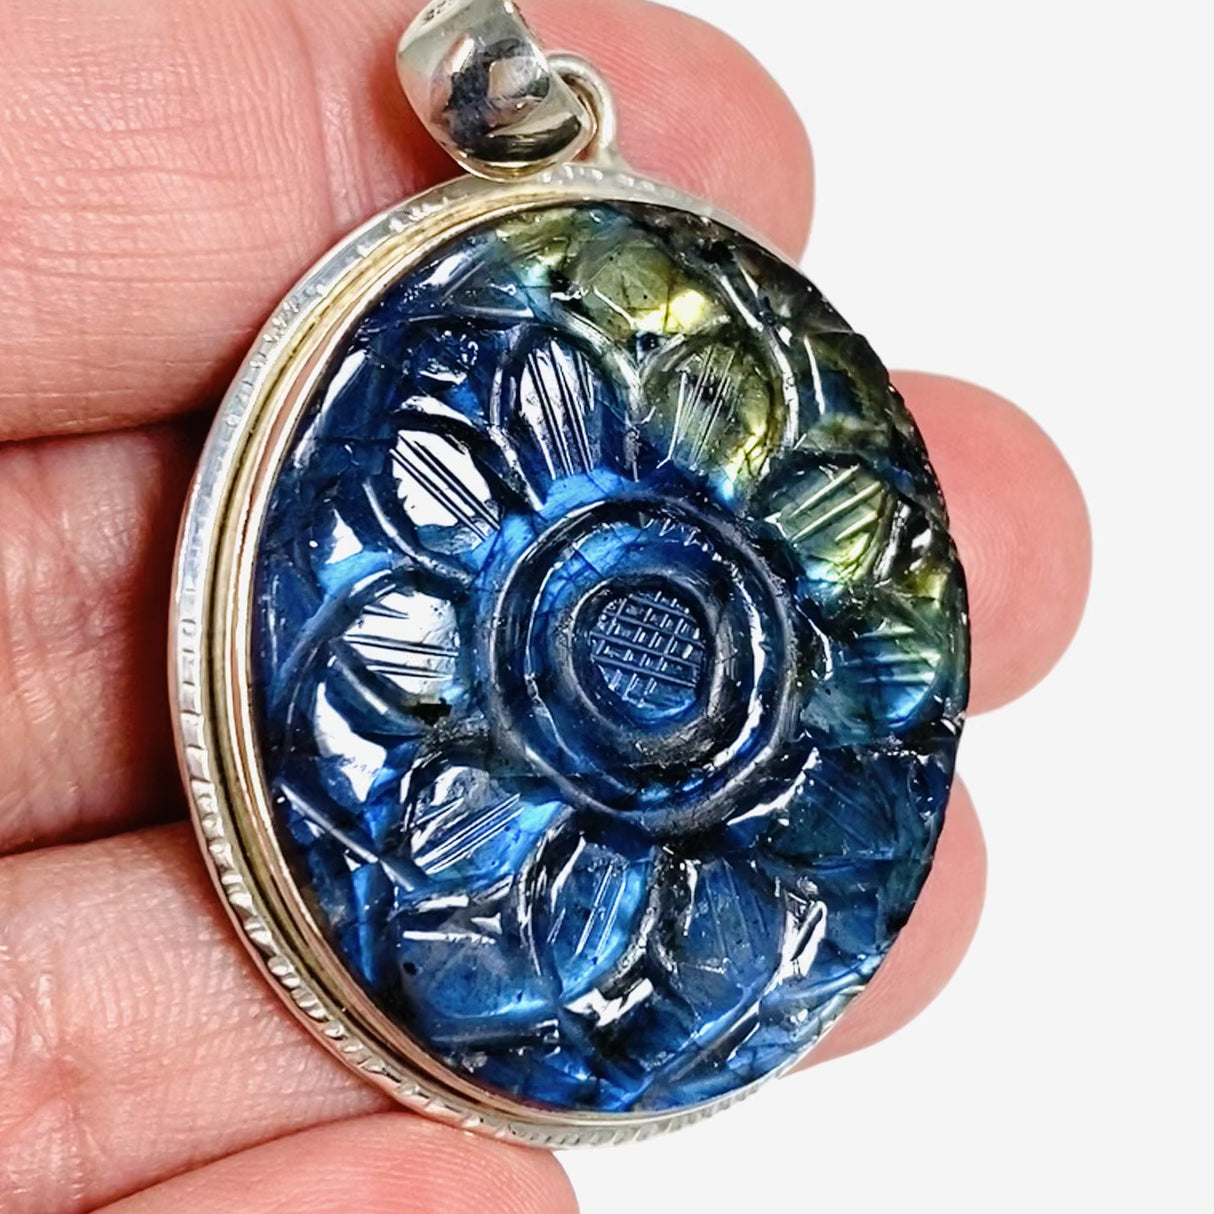 Oval shaped blue and gold flash labradorite flower carving pendant set in silver shown in the hand